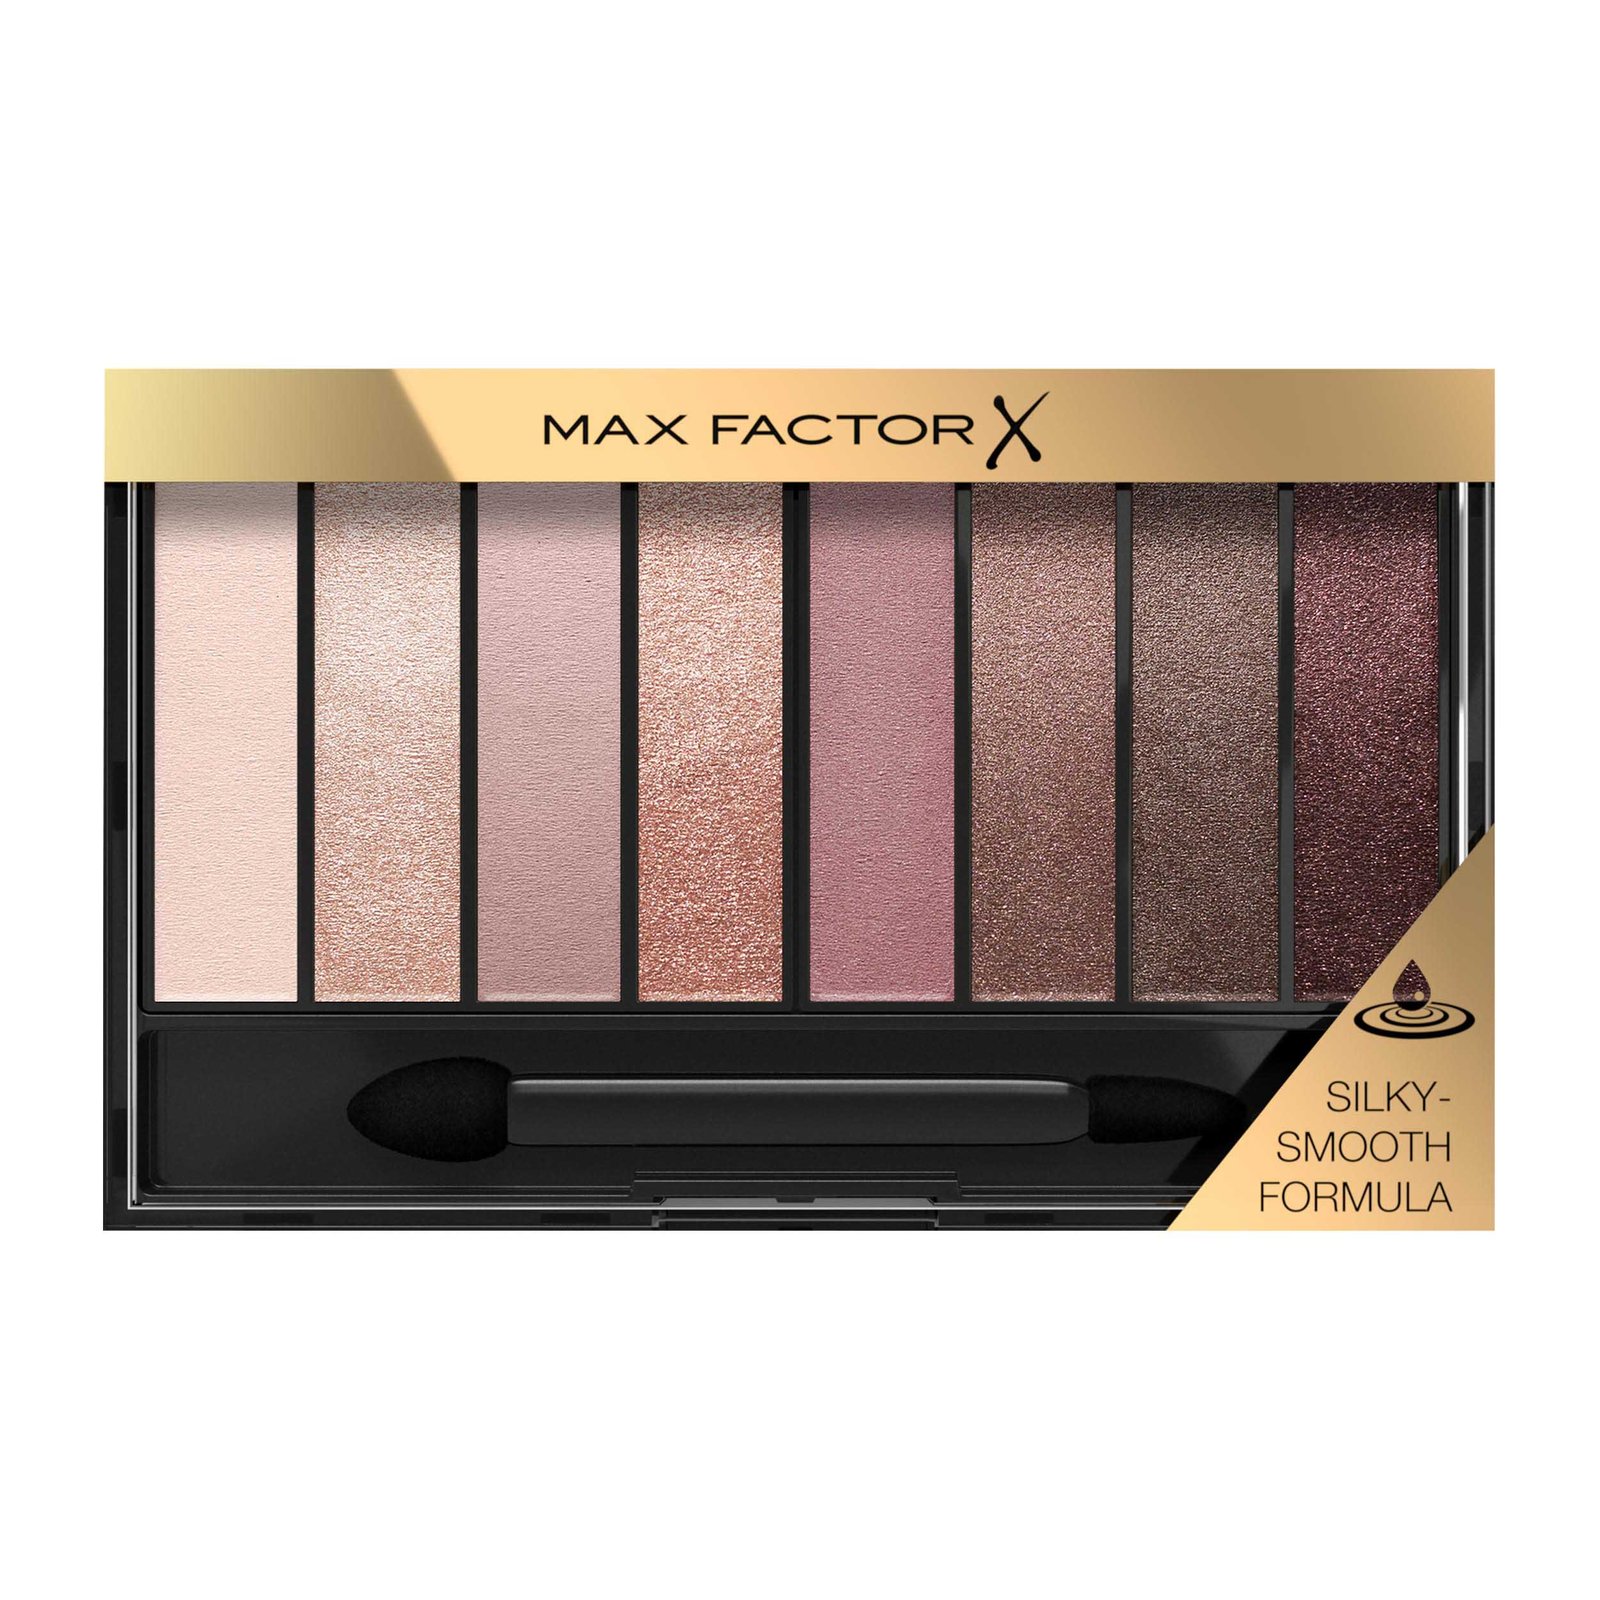 Max Factor Masterpiece Nude Palette 003 Rose Nudes 7g